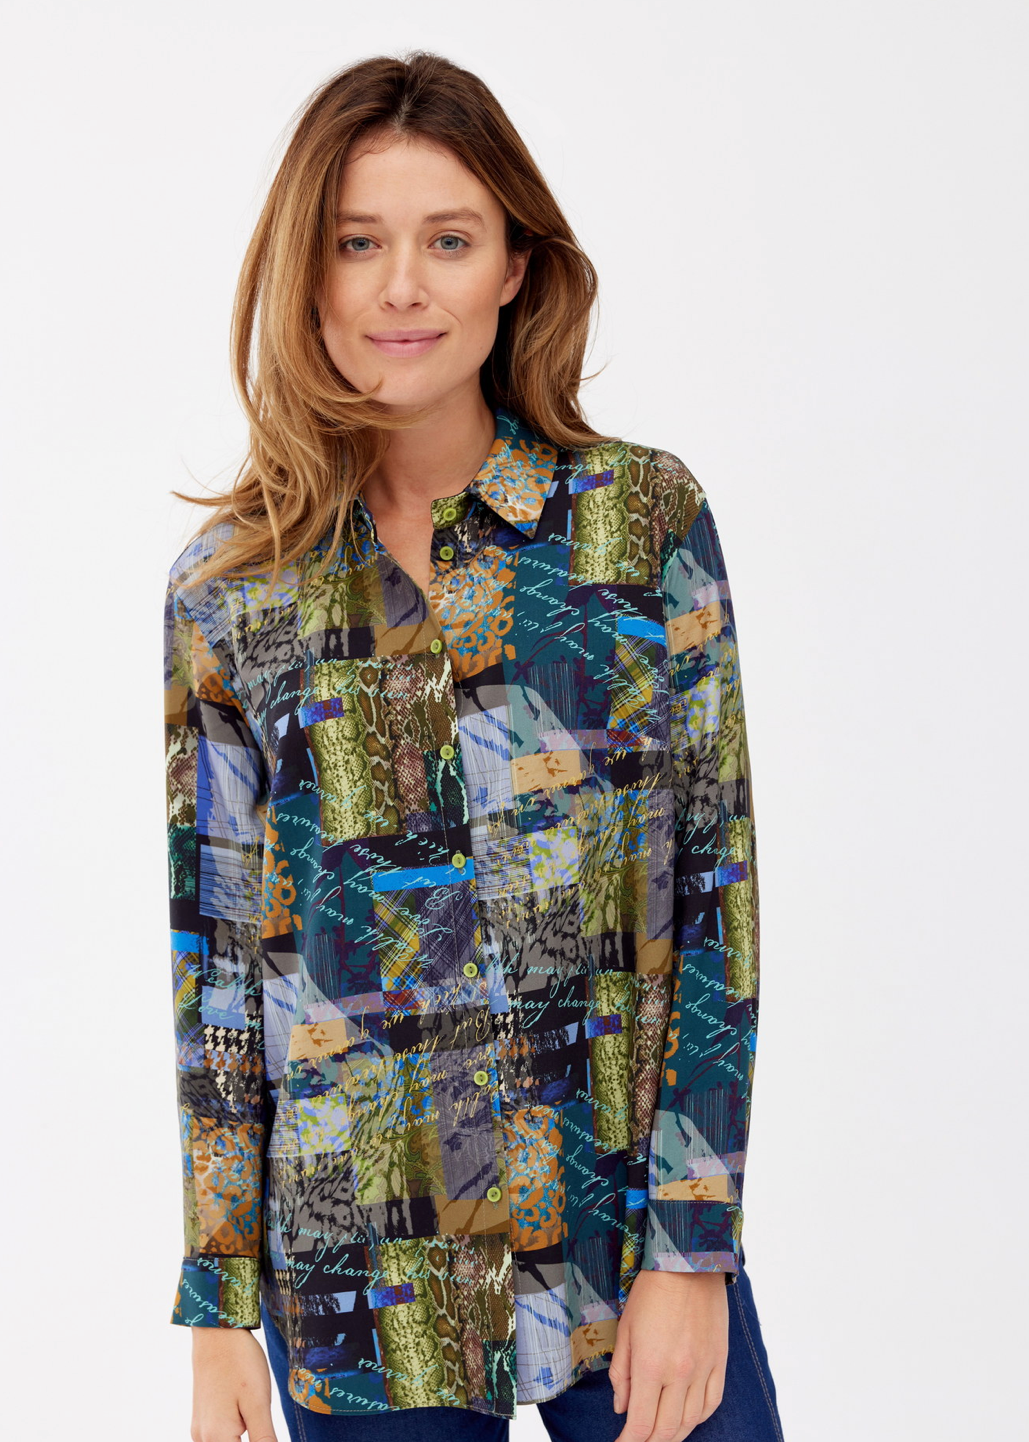 FERIA business shirt with a colourful print